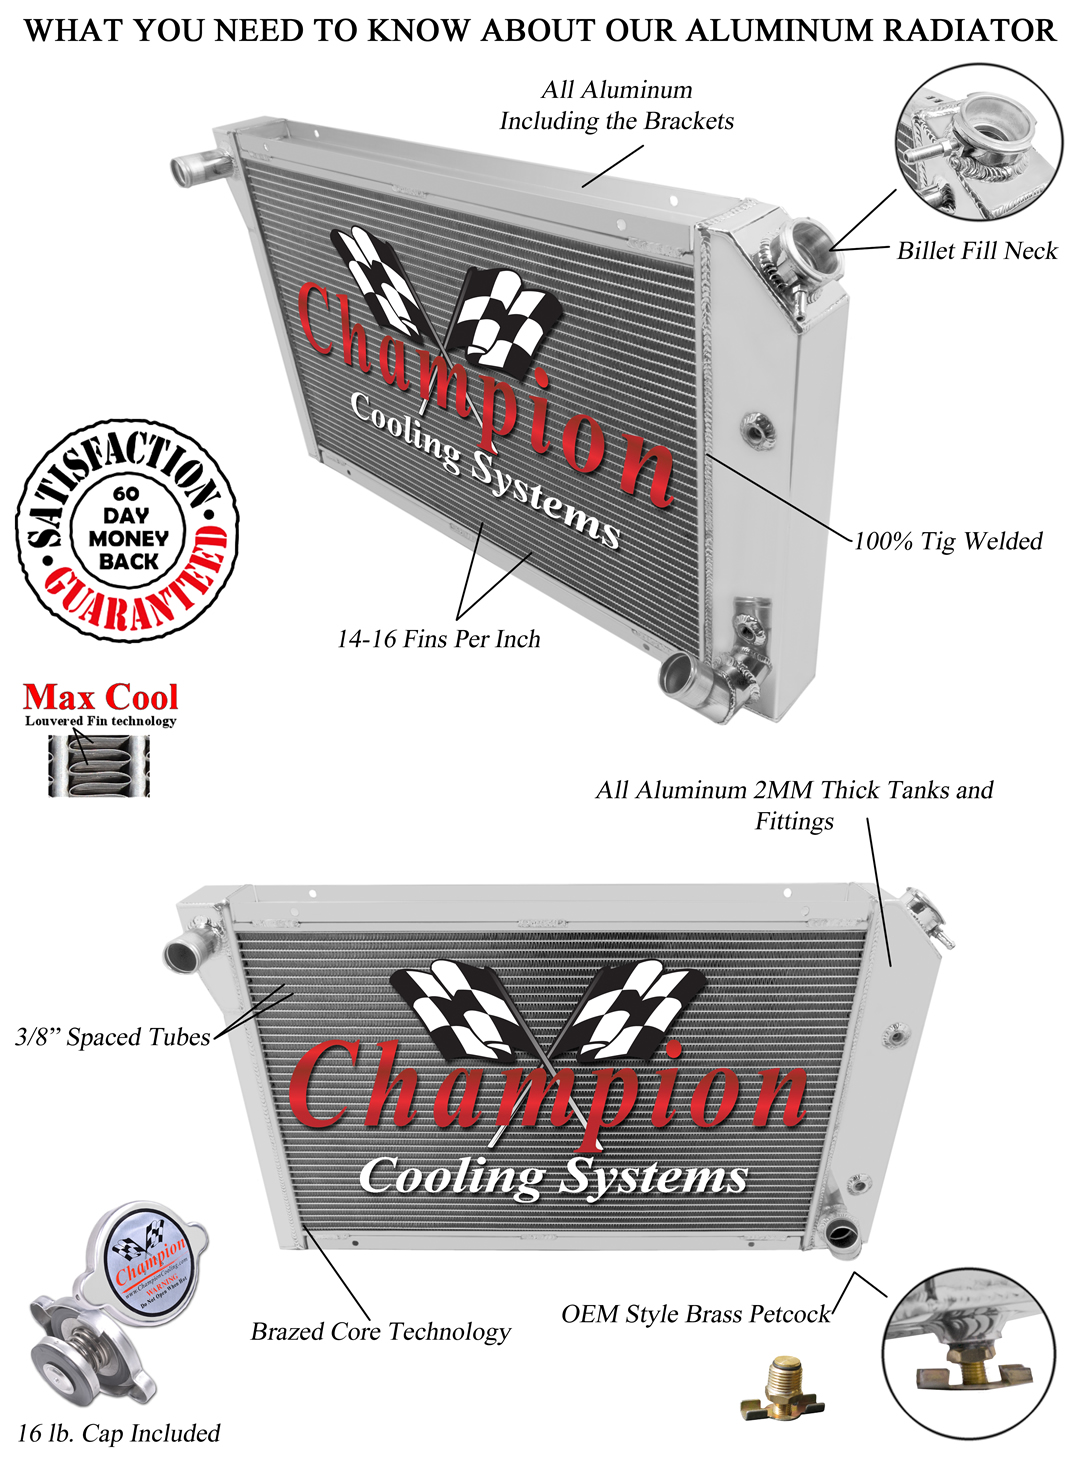 https://www.championcooling.com/photos/Photos%20White/Without%20Fans/718/718%20Both%20Diagram.JPG